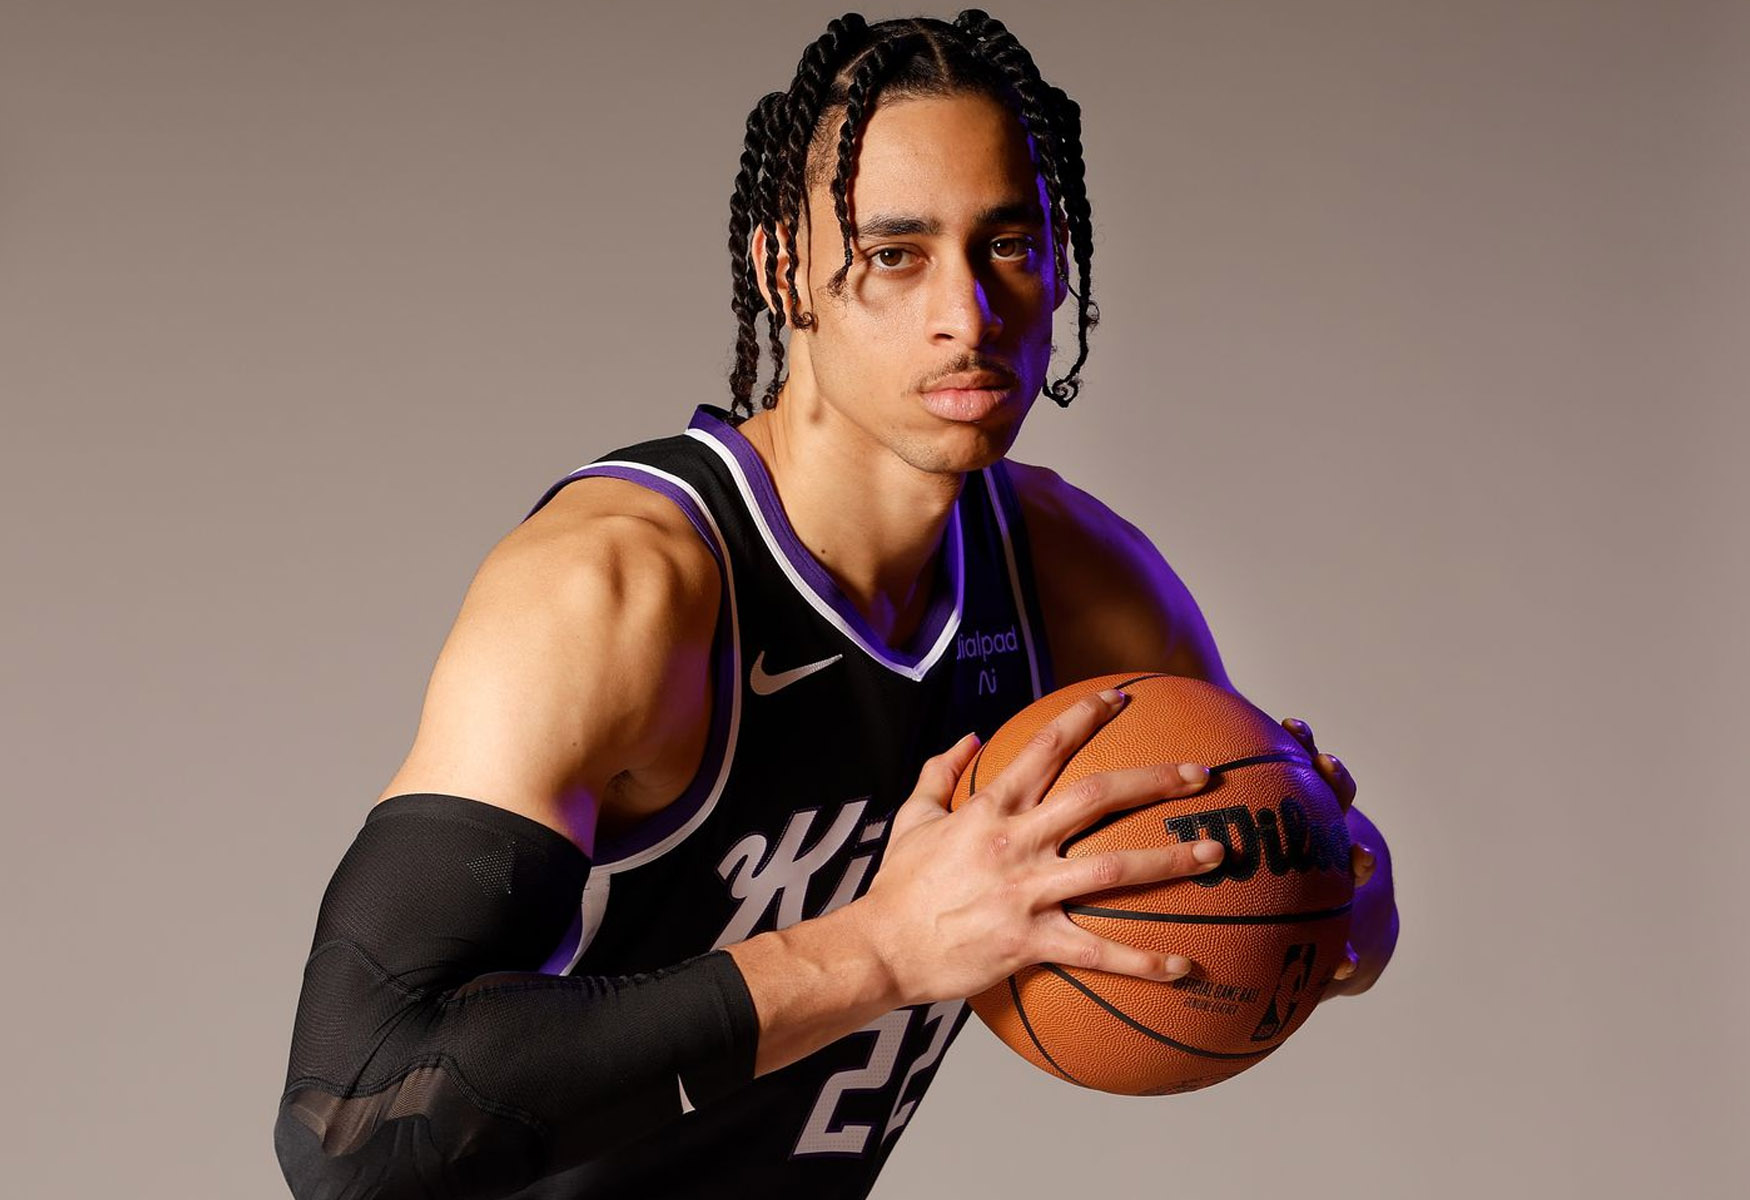 nba-g-league-player-chance-comanche-arrested-on-suspicion-of-murdering-woman-and-dumping-her-in-desert